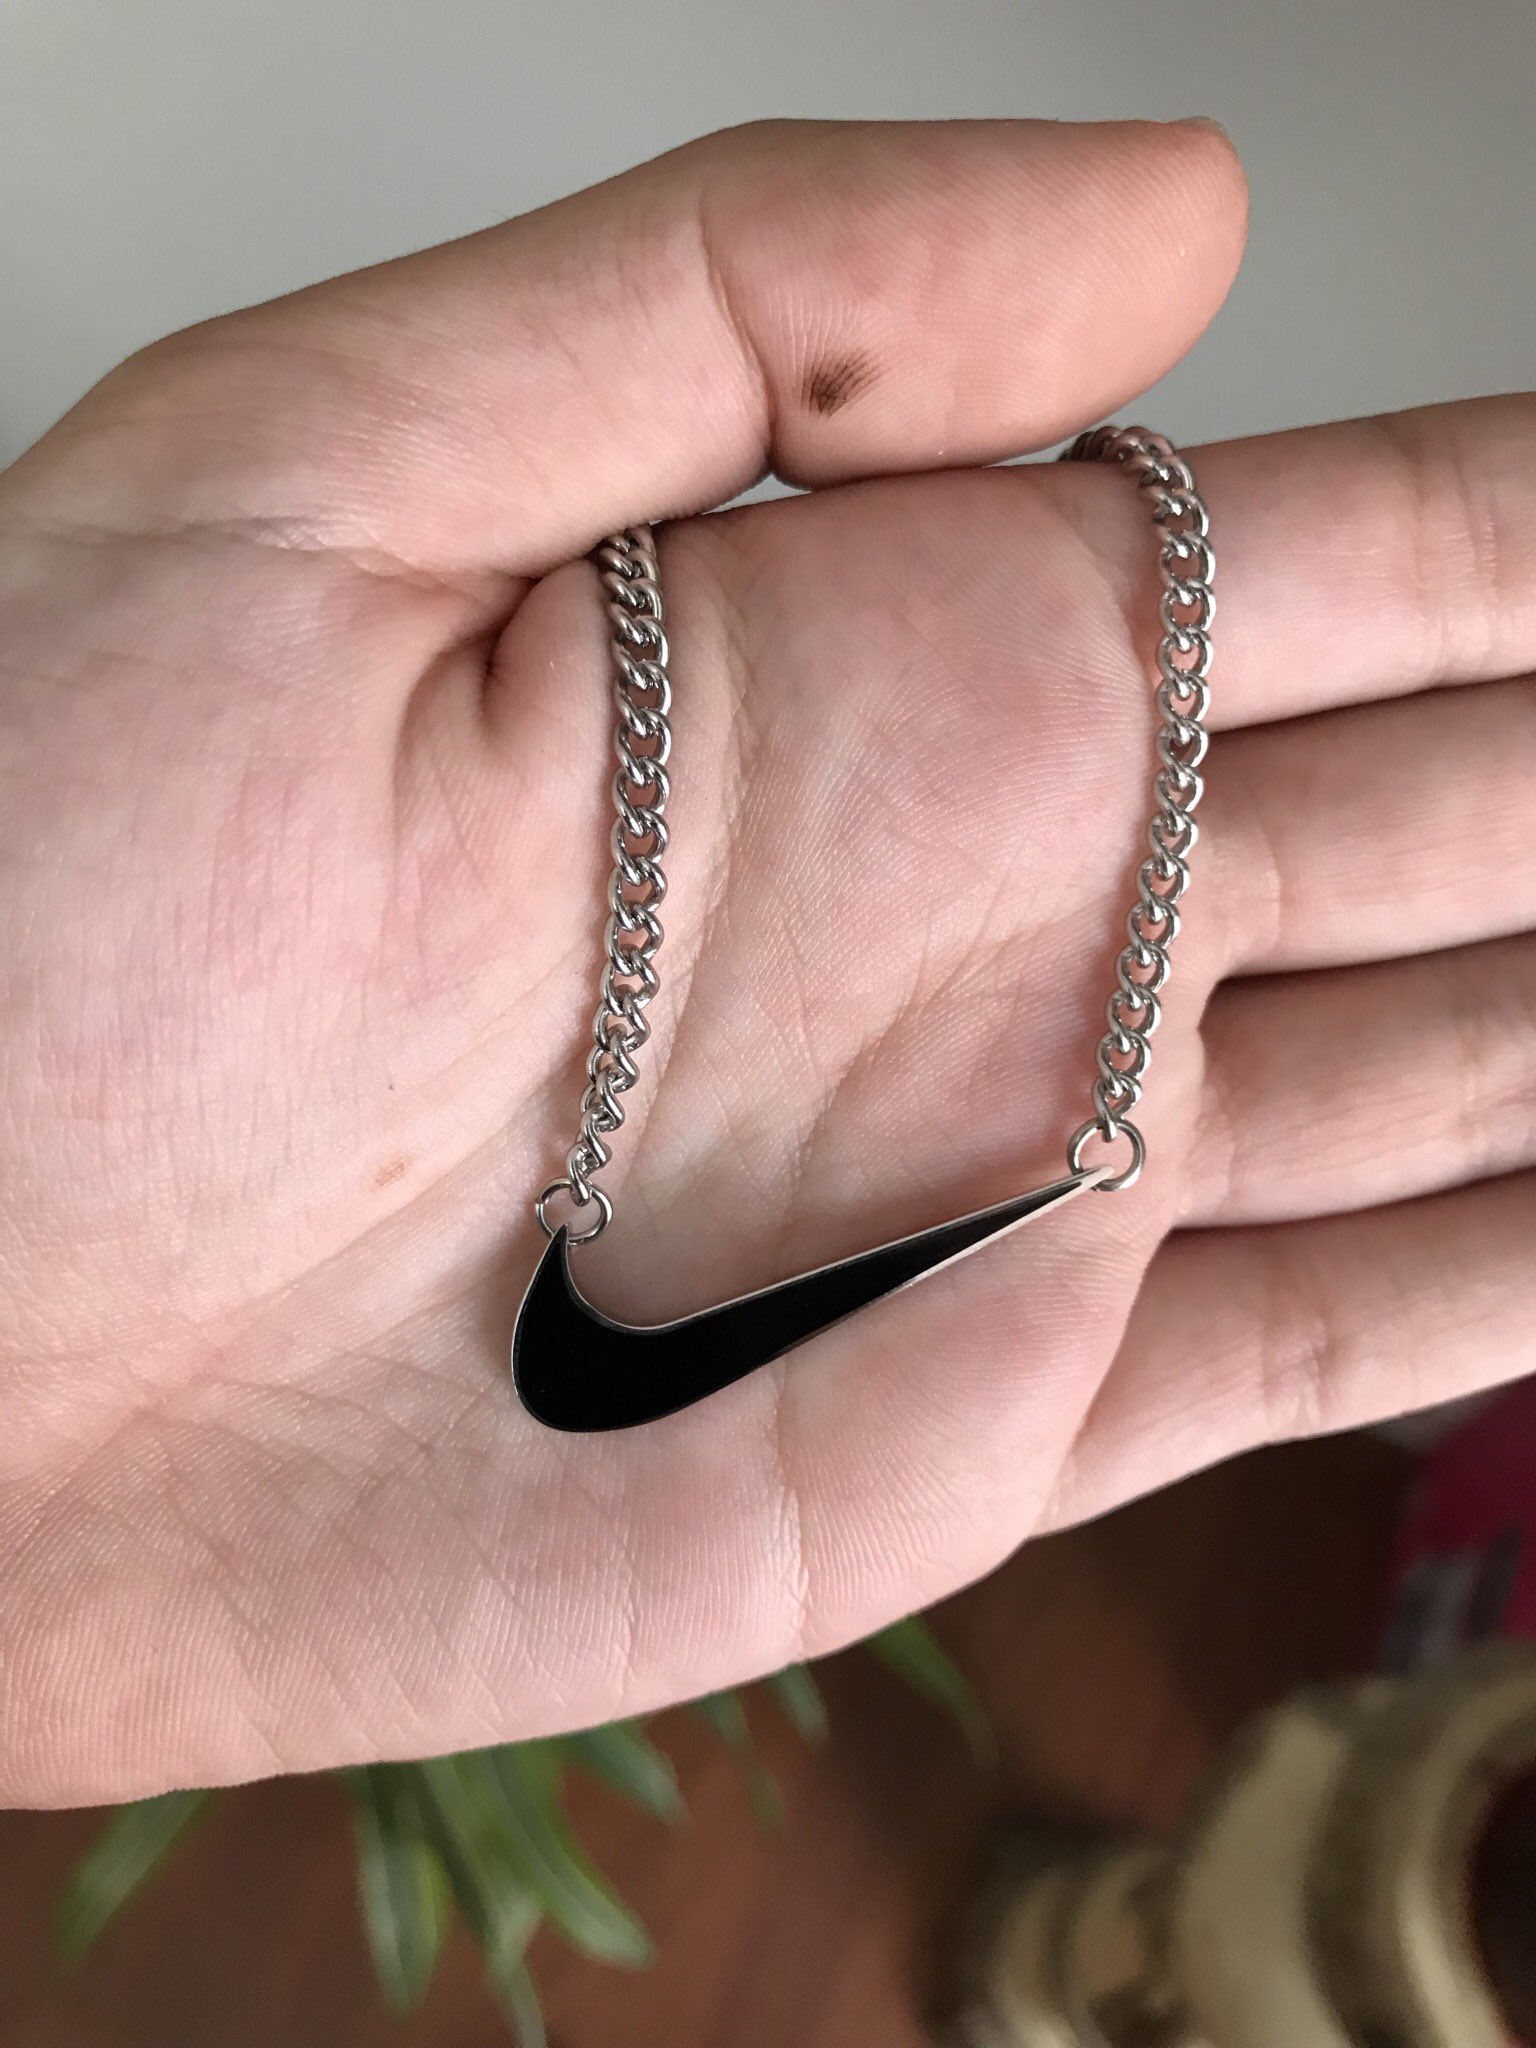 yordy on X: Silver Nike Swoosh Necklace Stainless Steel Necklace